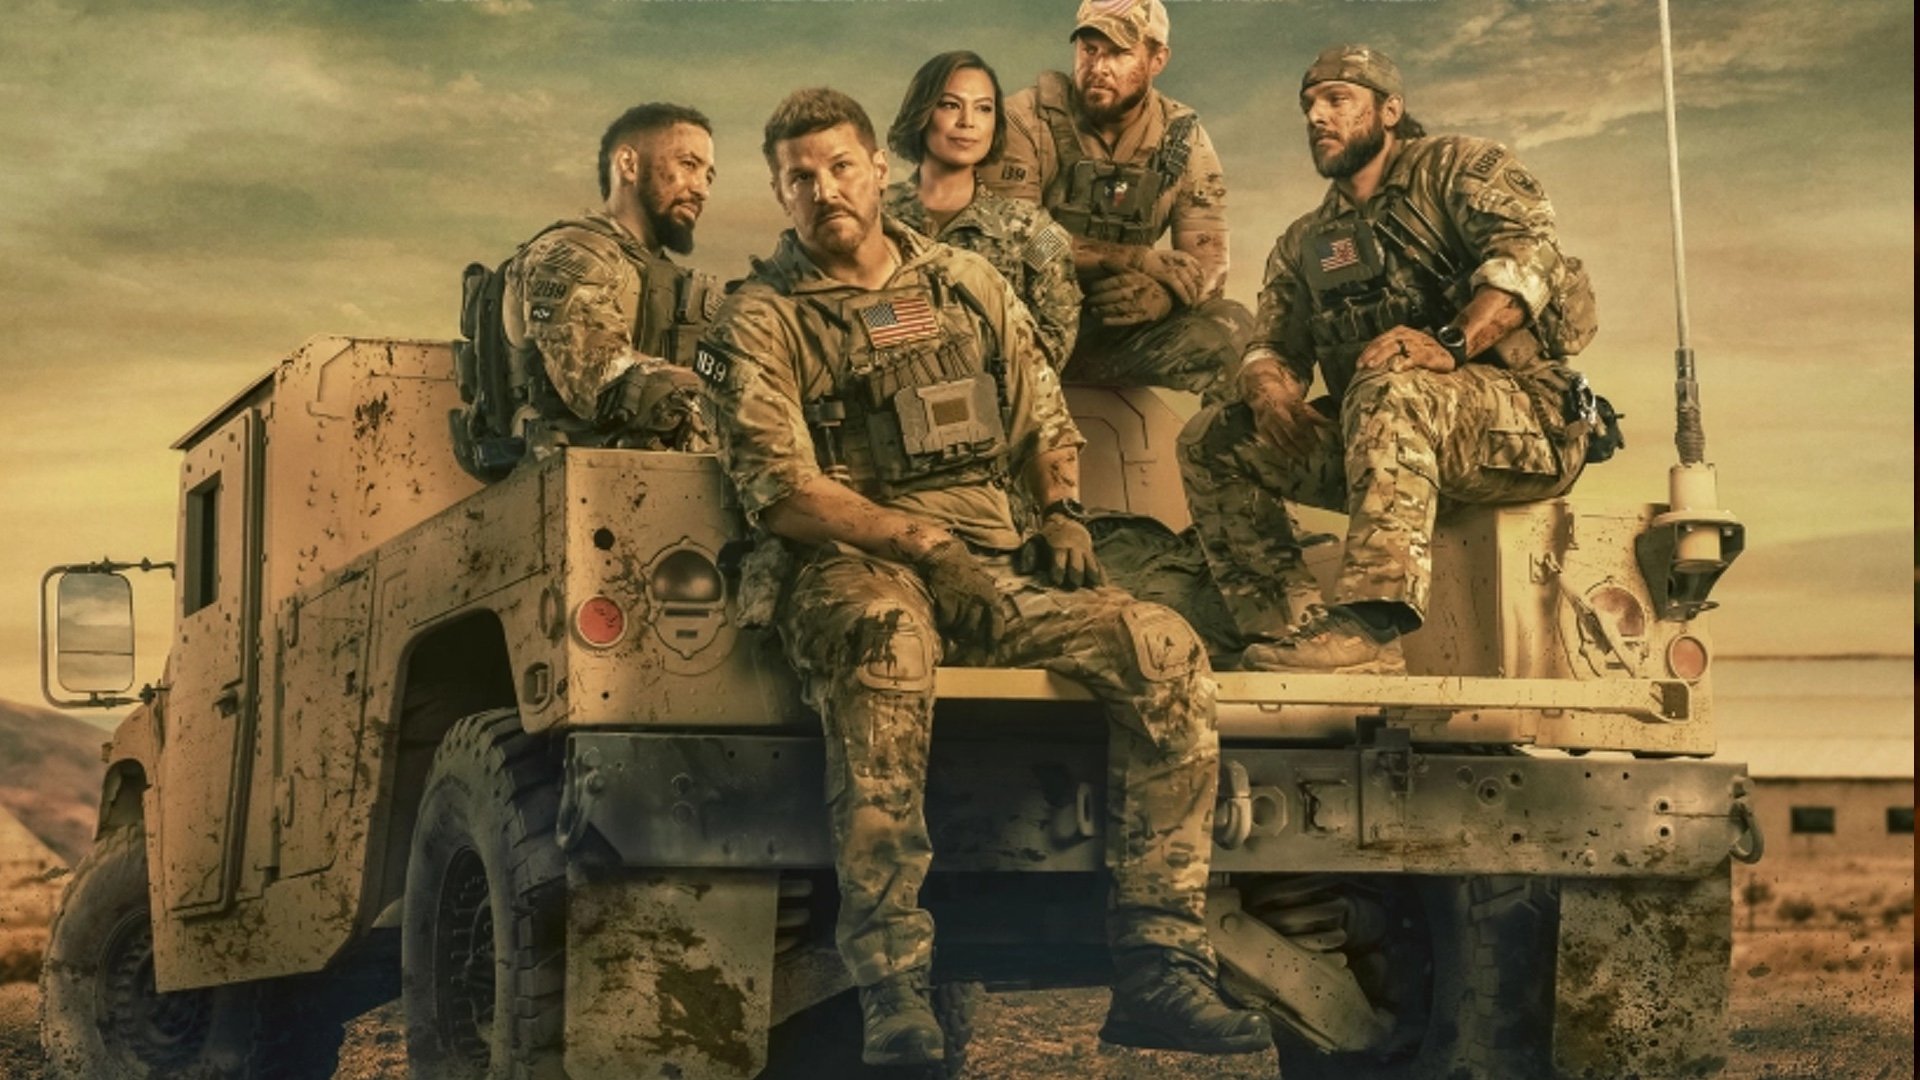 Trailer for SEAL TEAM Season 6 and Paramount + Premiere Date Set - The ...